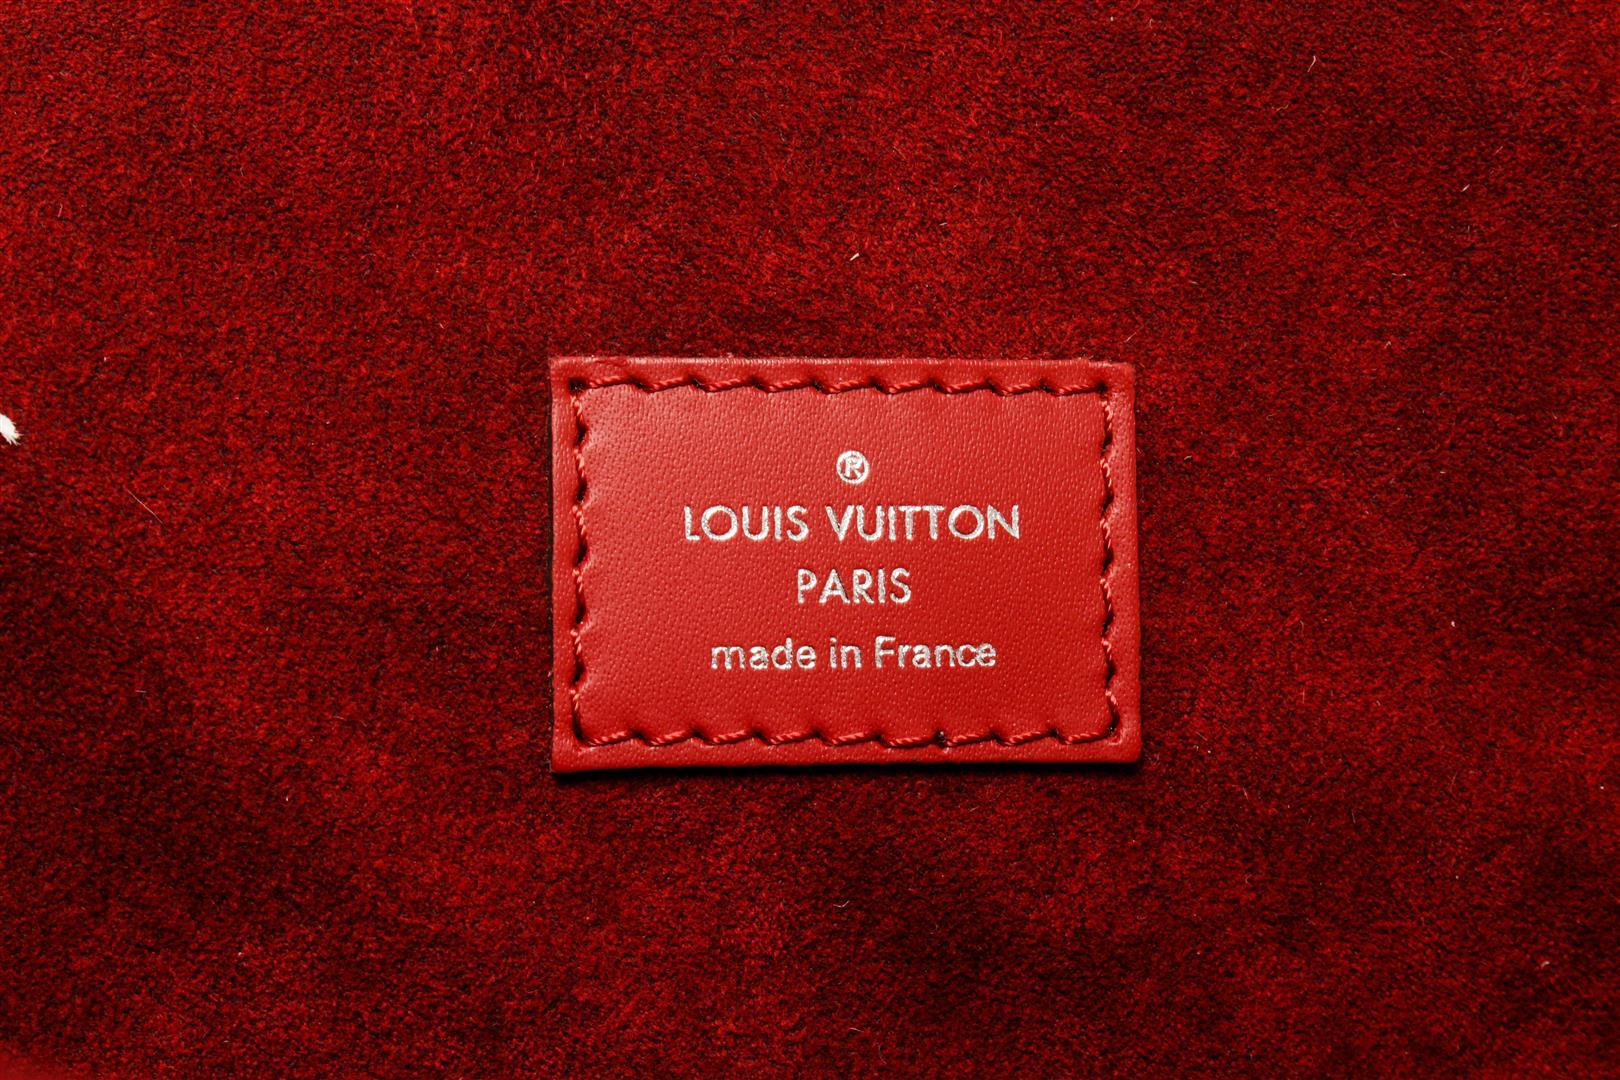 Louis Vuitton Red Epi Leather Christopher PM Backpack Bag